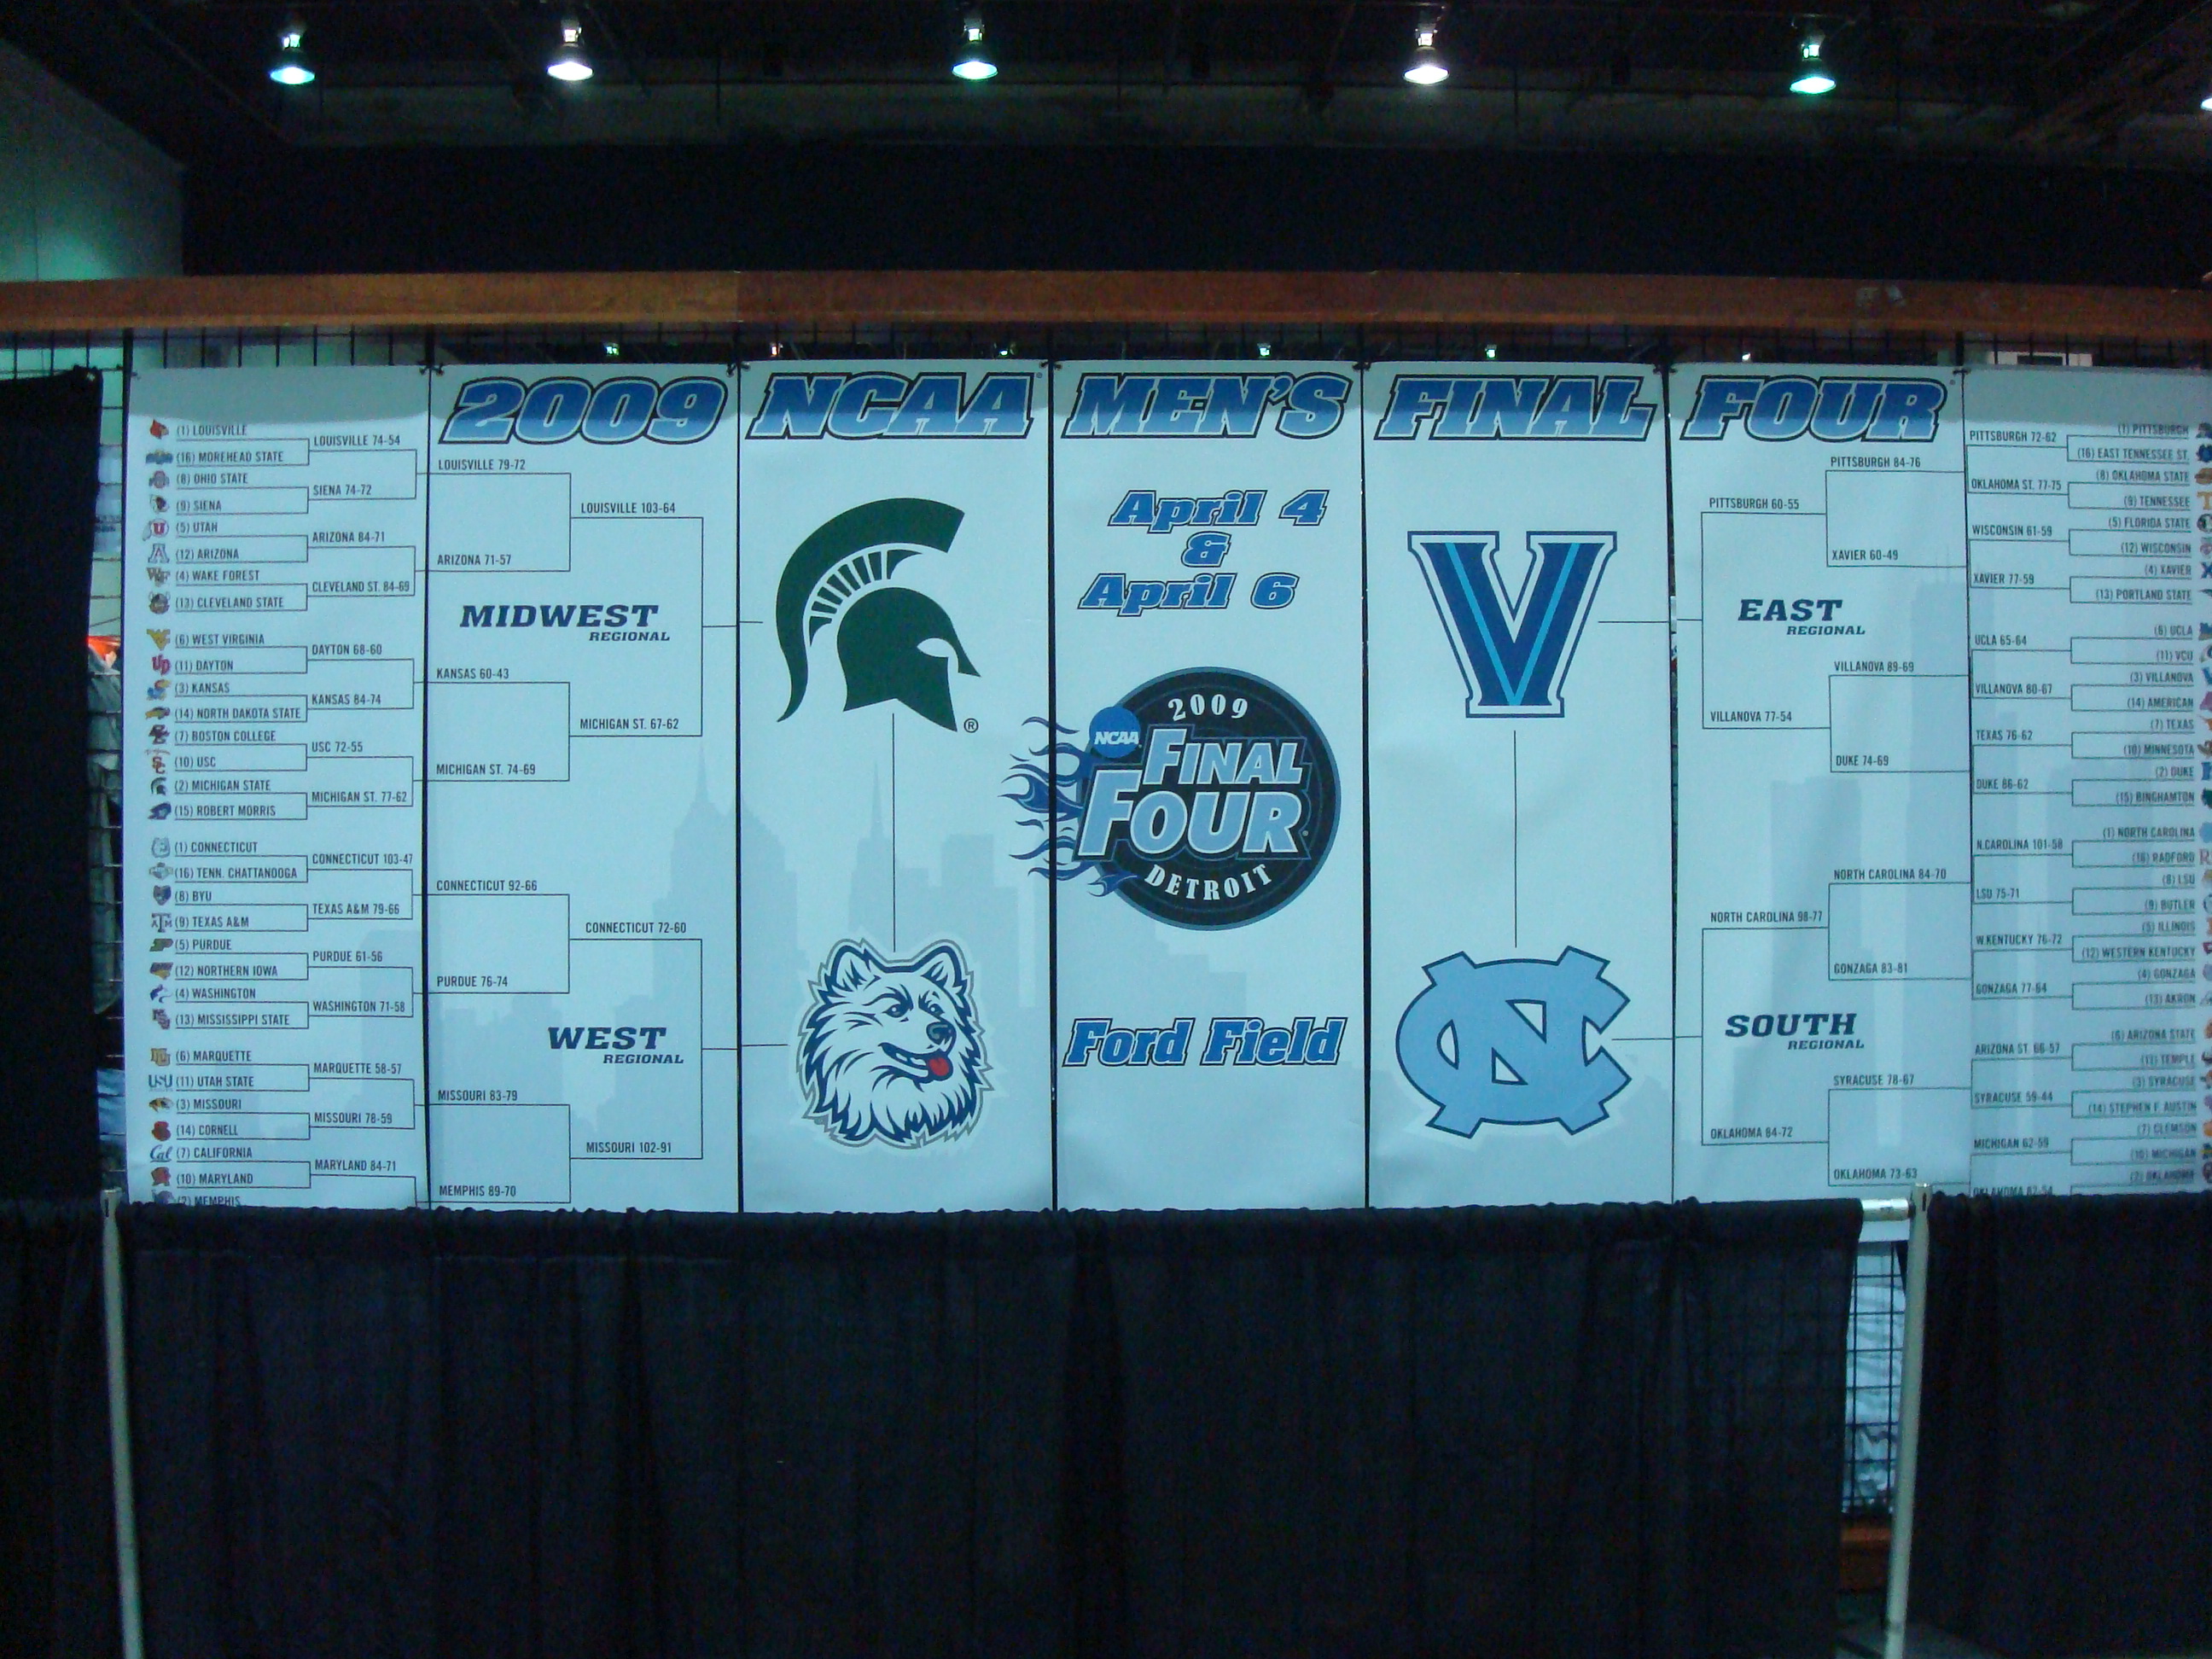 Who are the four number one seeds in the 2011 NCAA Mens Tournament